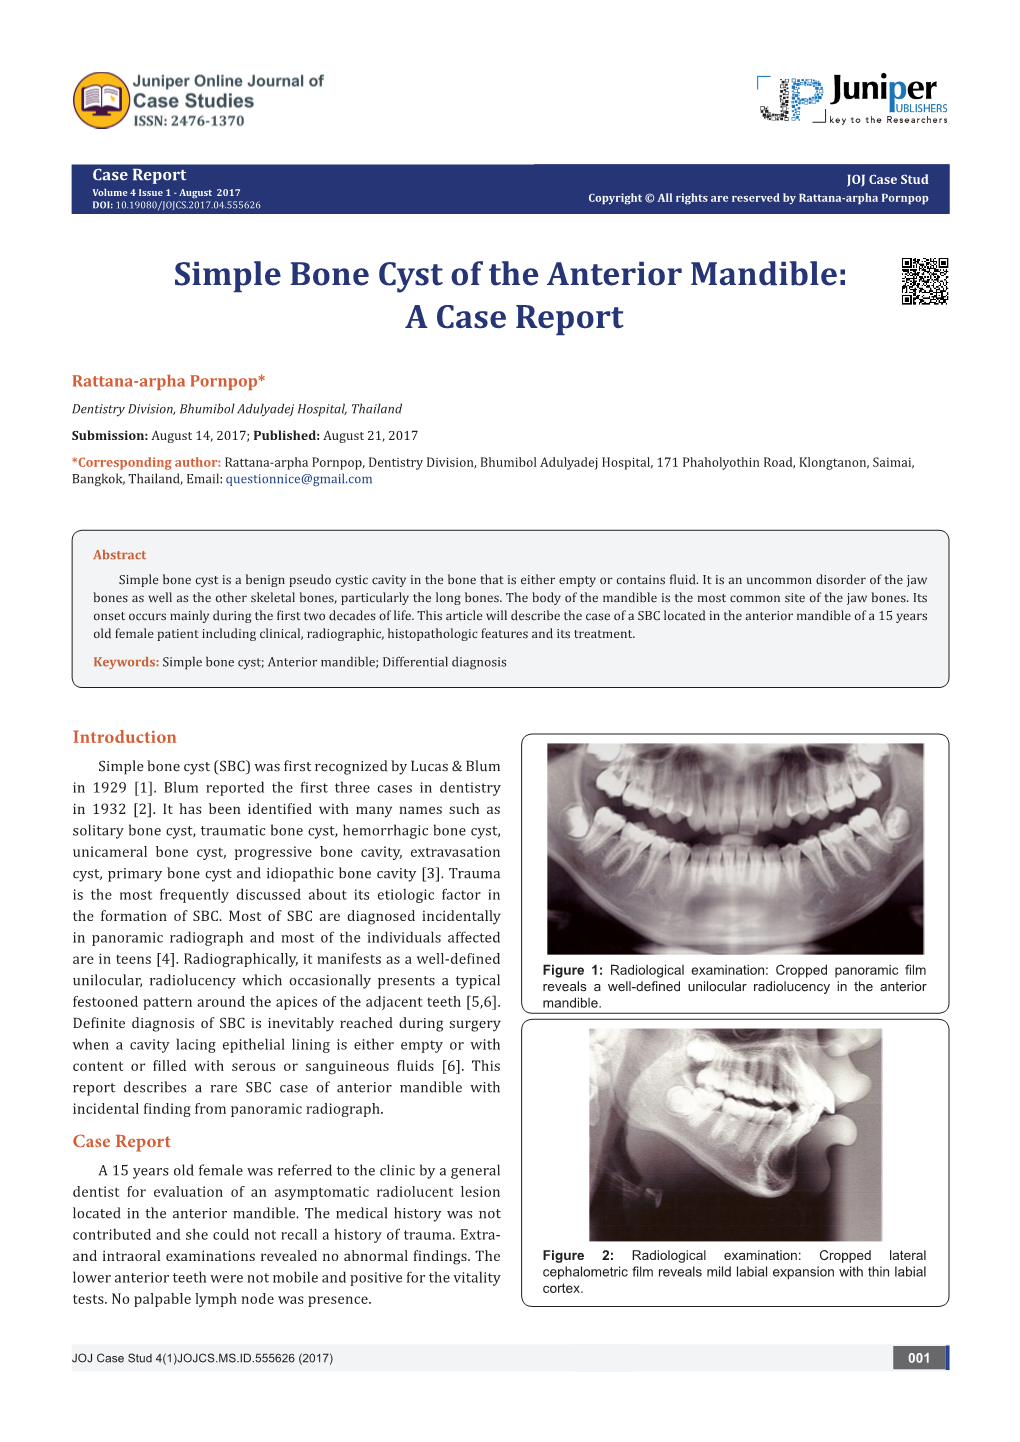 Simple Bone Cyst of the Anterior Mandible: a Case Report